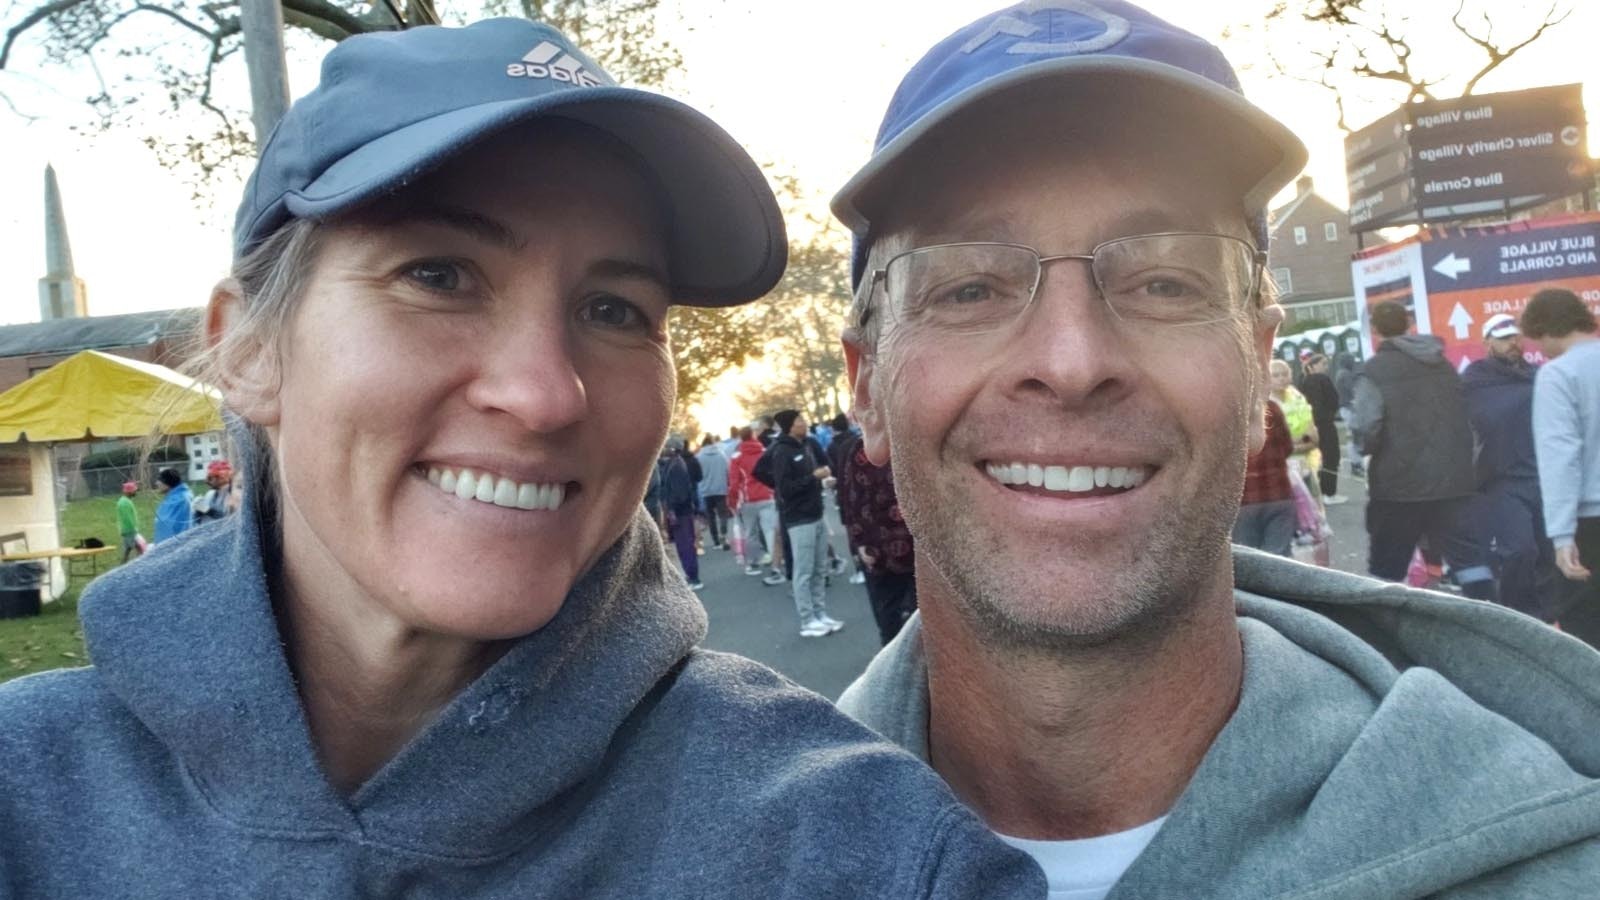 Joe and AnnMarie Wilson have are serious about going the distance, with each other and on the pavement as marathoners.